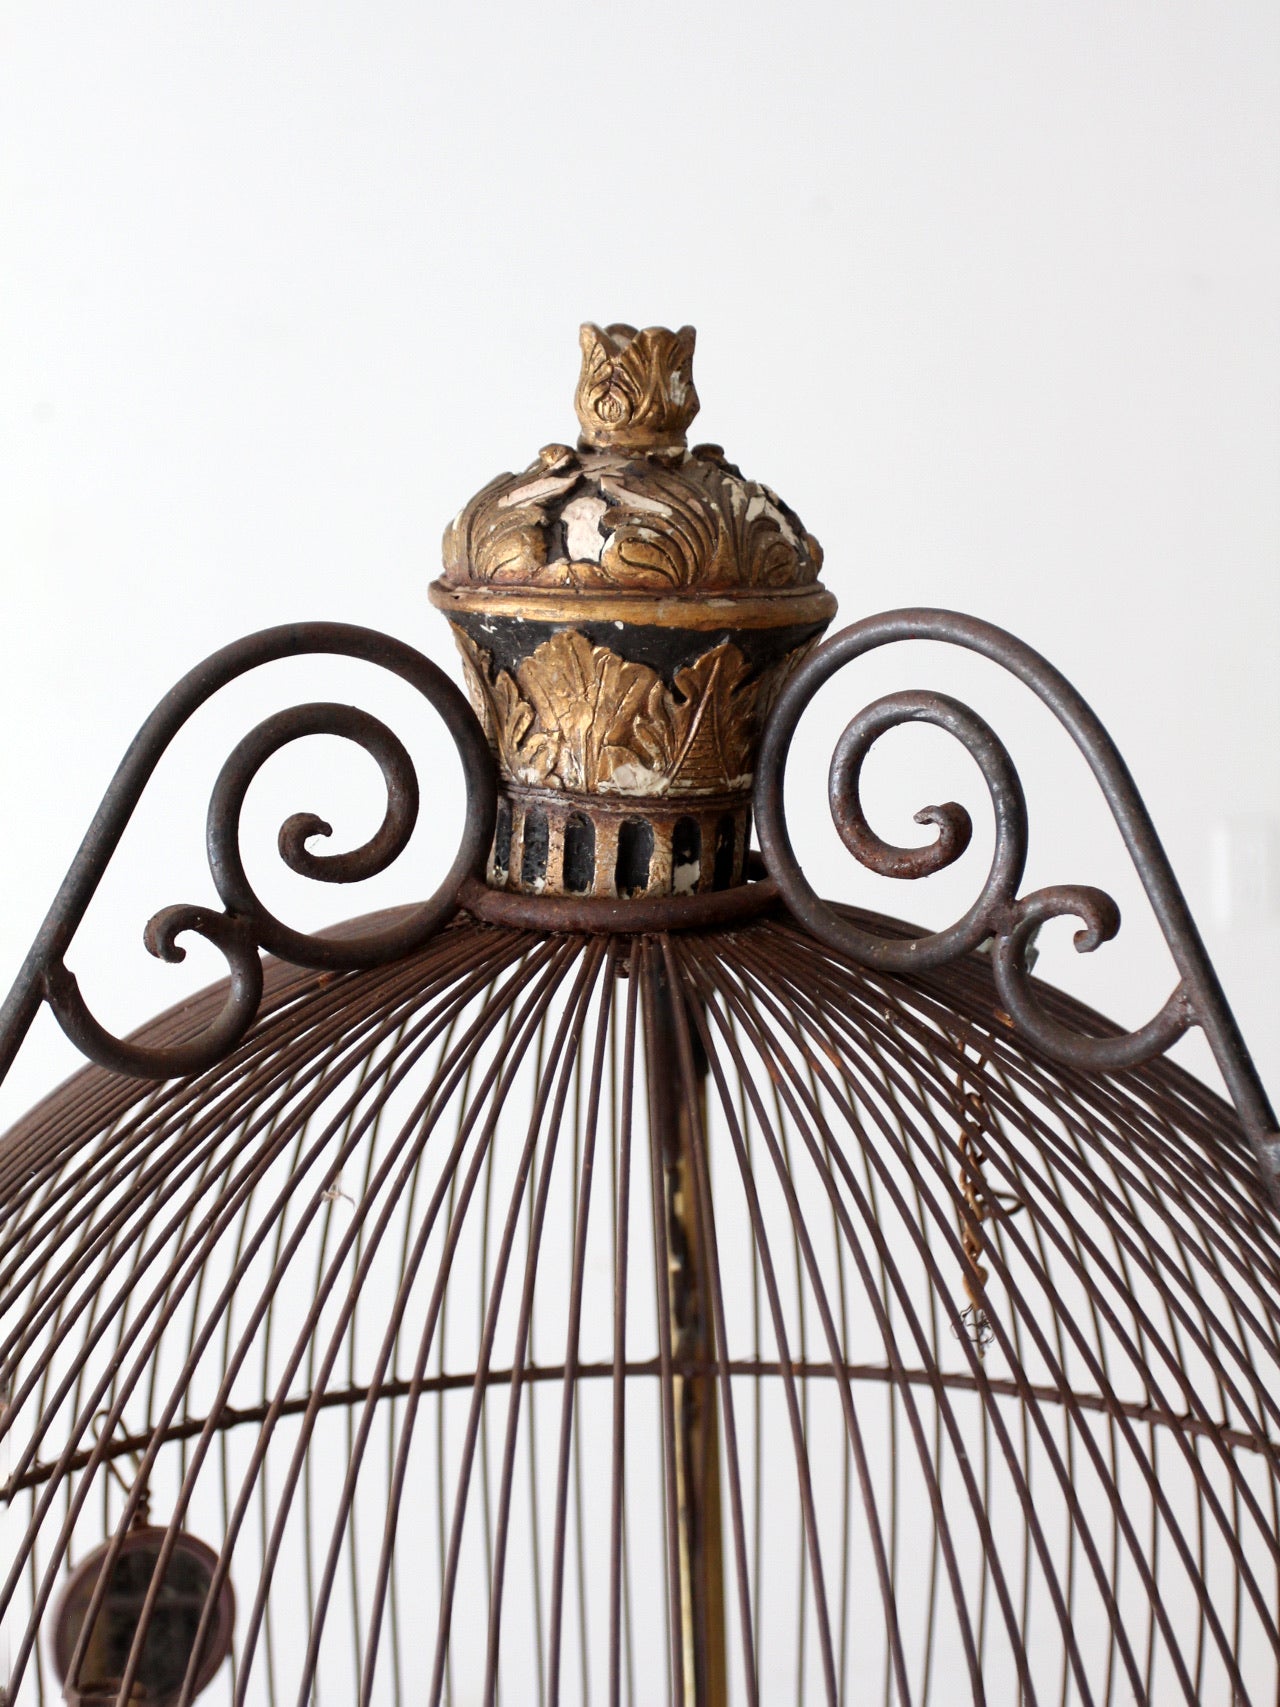 French Victorian style large birdcage – 86 Vintage